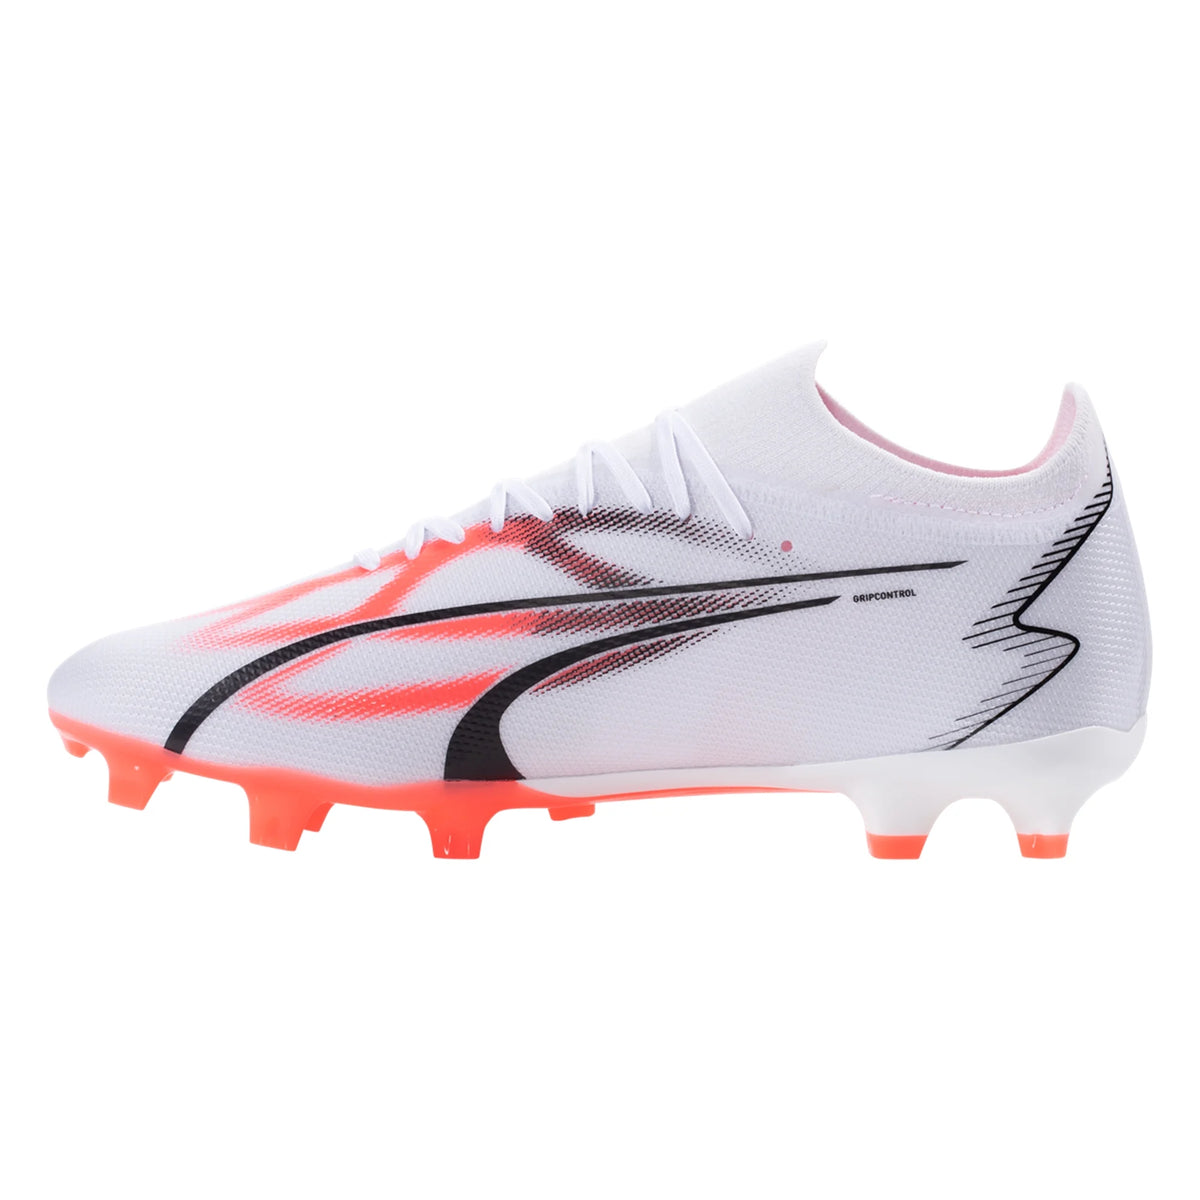 Puma Ultra Match - Cleat Soccer FG/AG White/Black/Fire Zone Firm Orchid Soccer 107347-01 Ground – USA